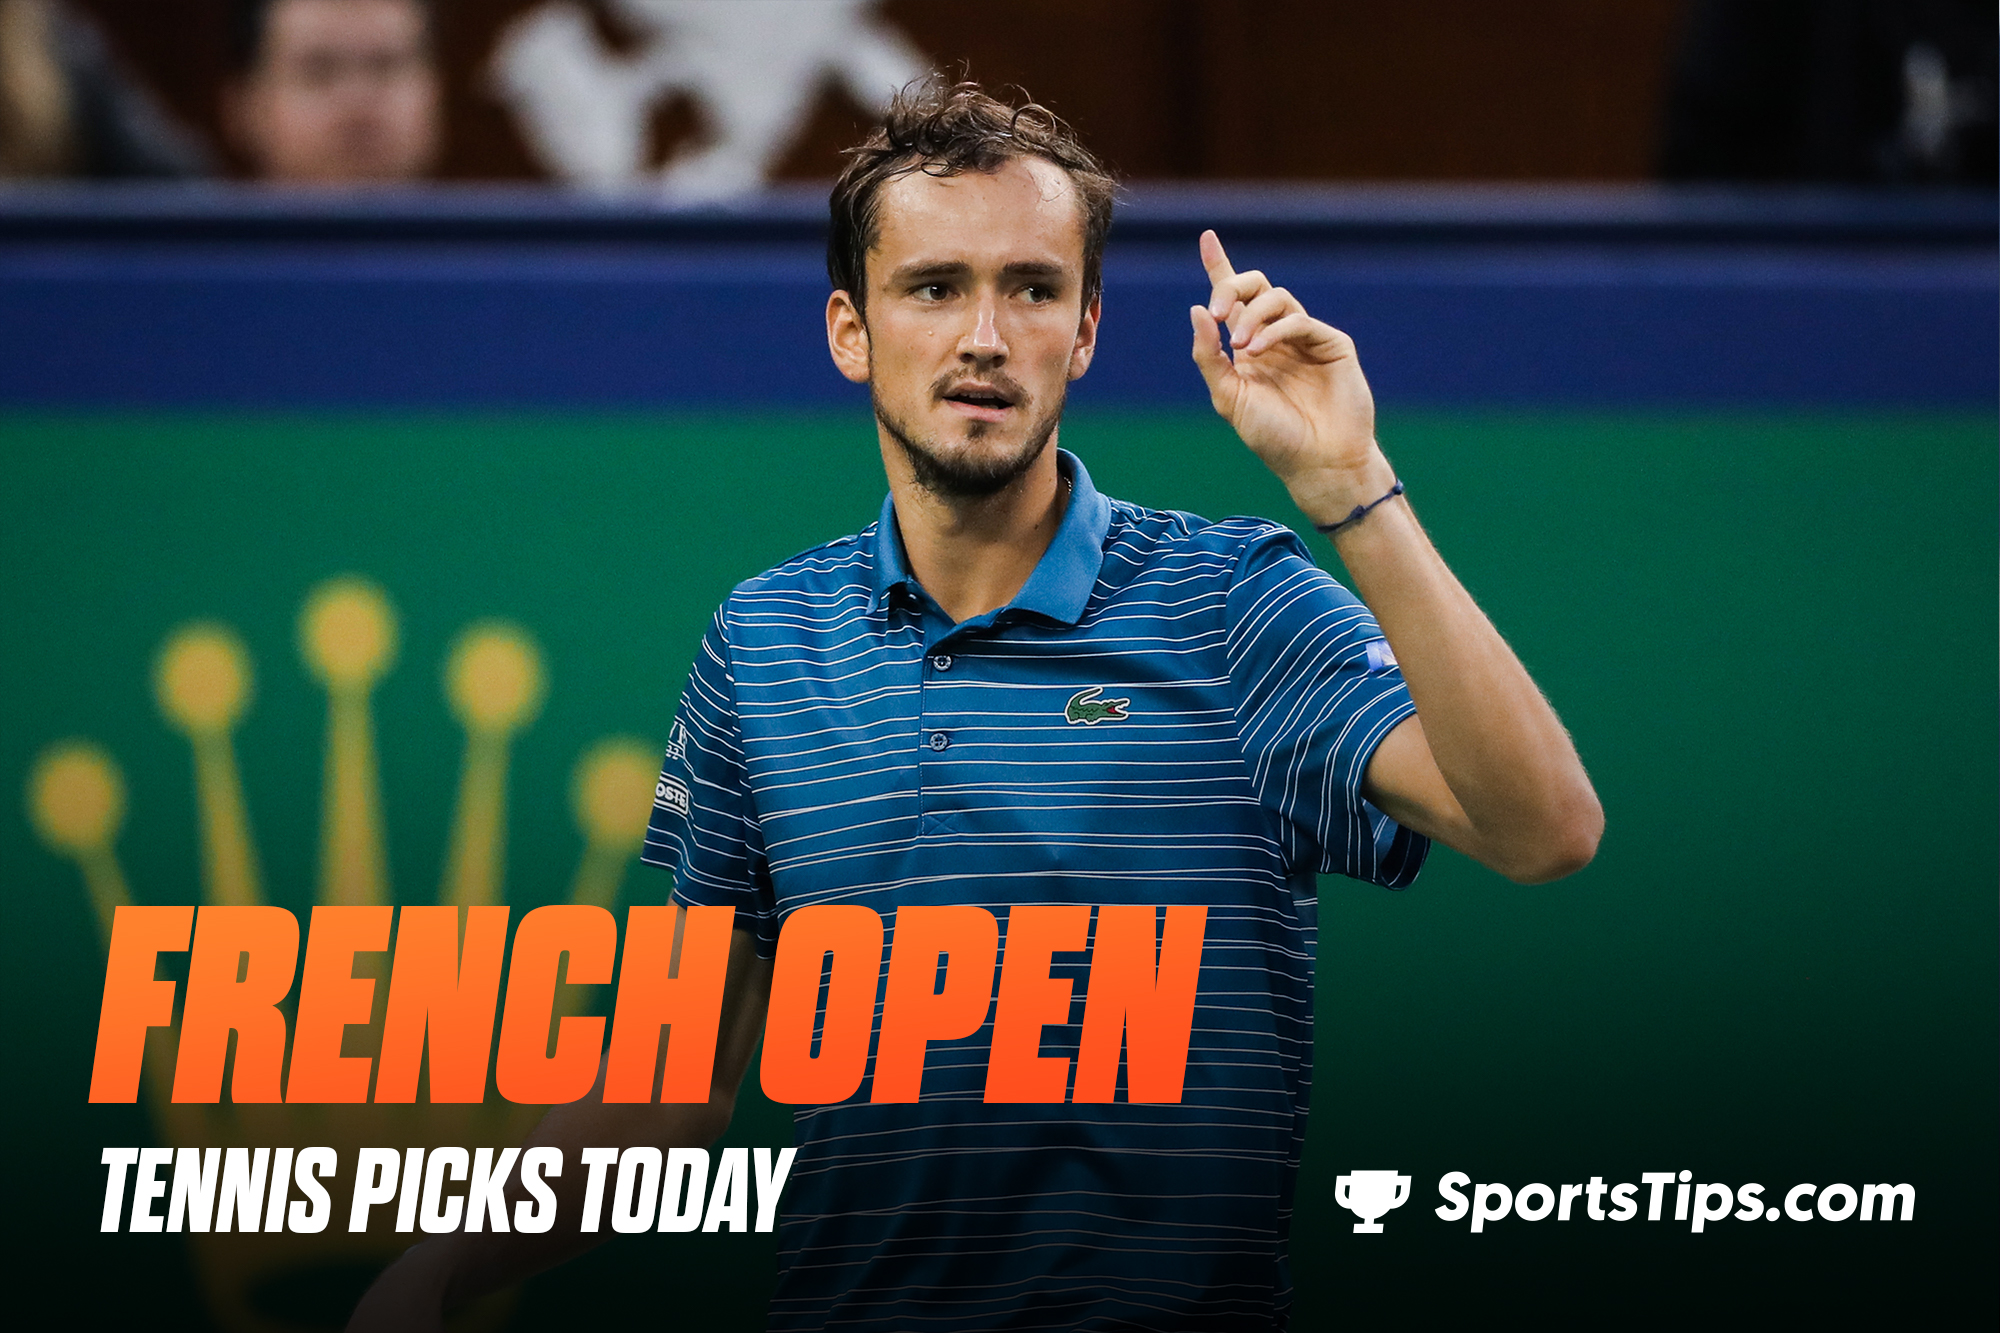 French Open Predictions 2022: SportsTips’ Top Tennis Picks For Round of 16